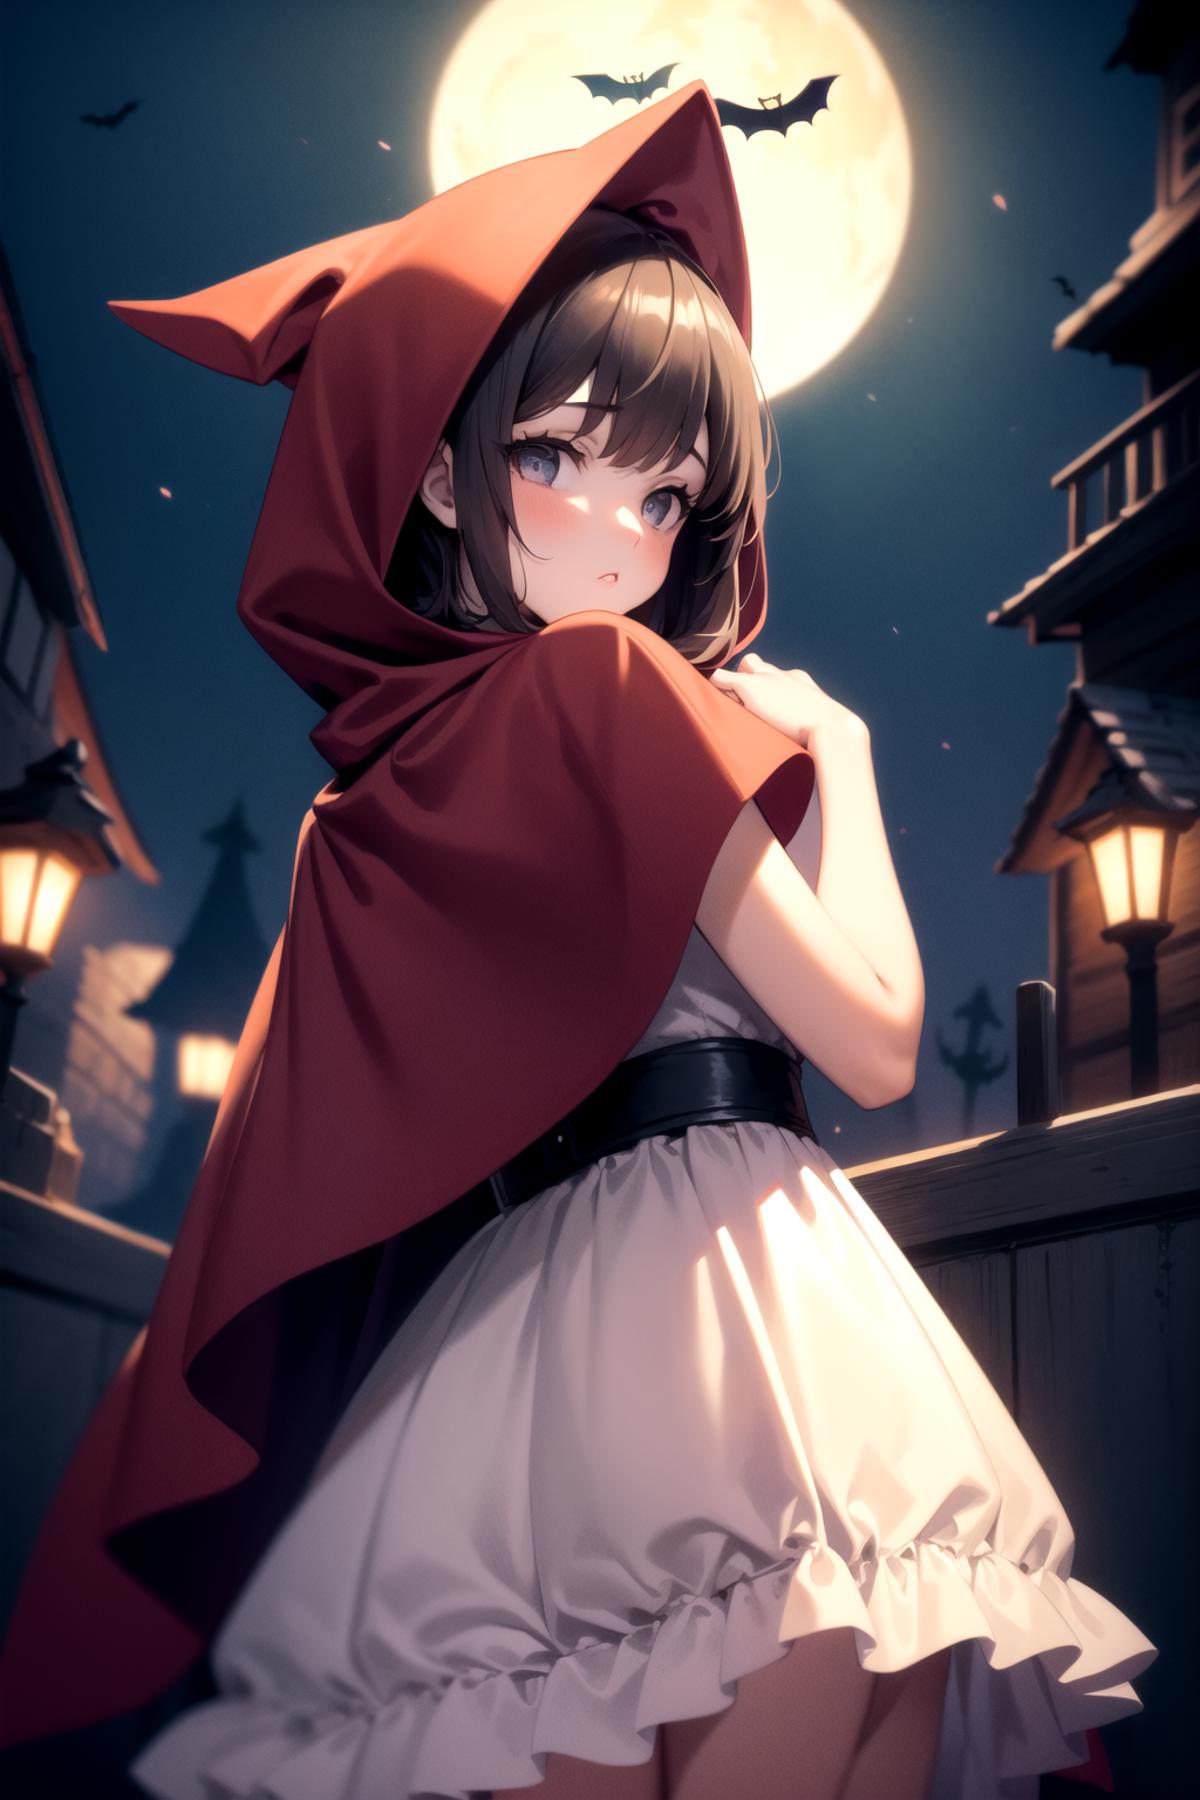 Little Girl in Red Dress and Cape Standing in the Moonlight